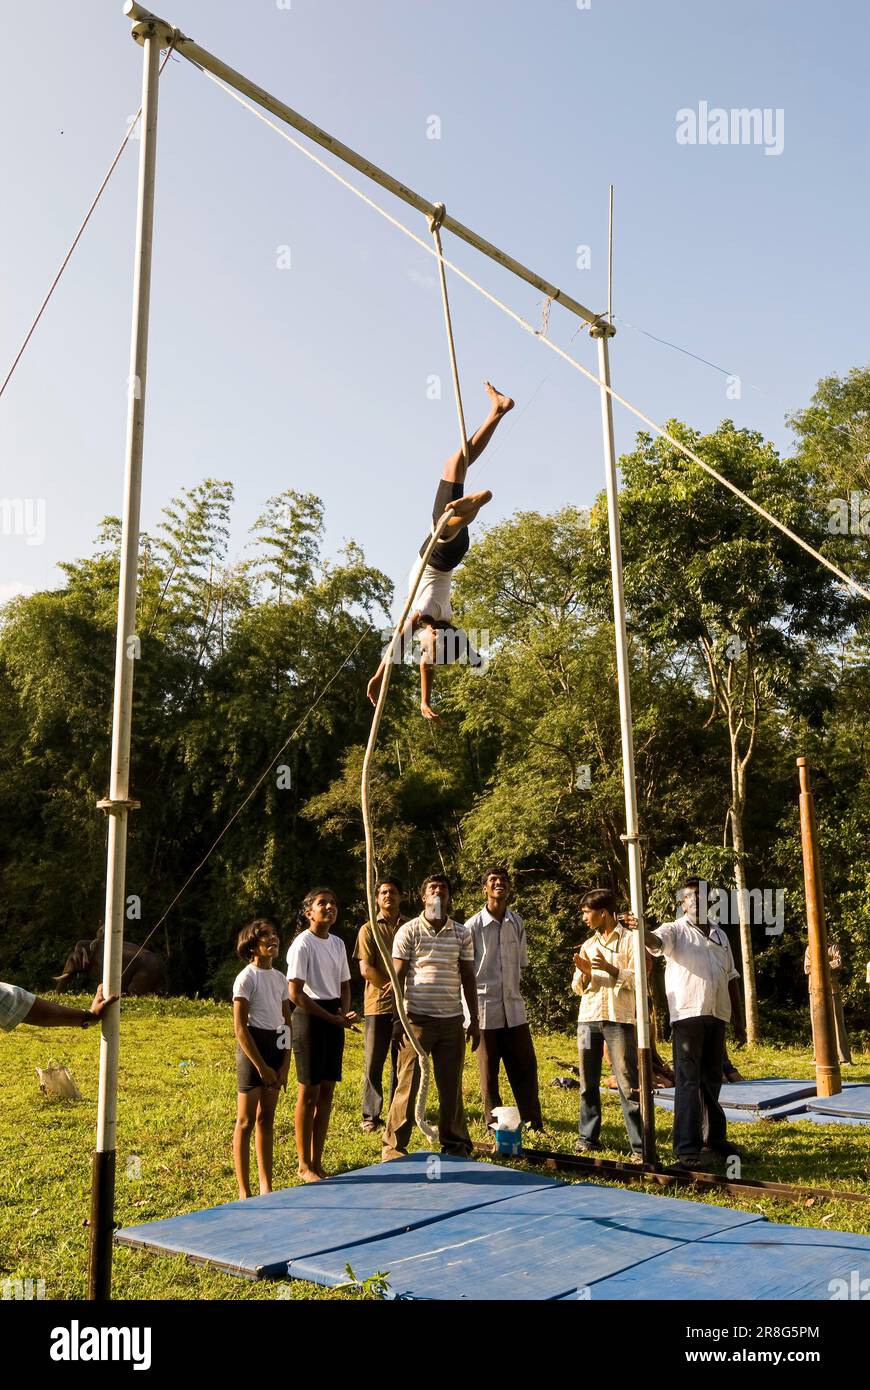 https://c8.alamy.com/comp/2R8G5PM/a-girl-performing-indian-pole-gymnastics-mallakhamba-mallakhamb-is-an-ancient-indian-sport-while-hanging-rope-during-the-elephants-day-celebration-2R8G5PM.jpg